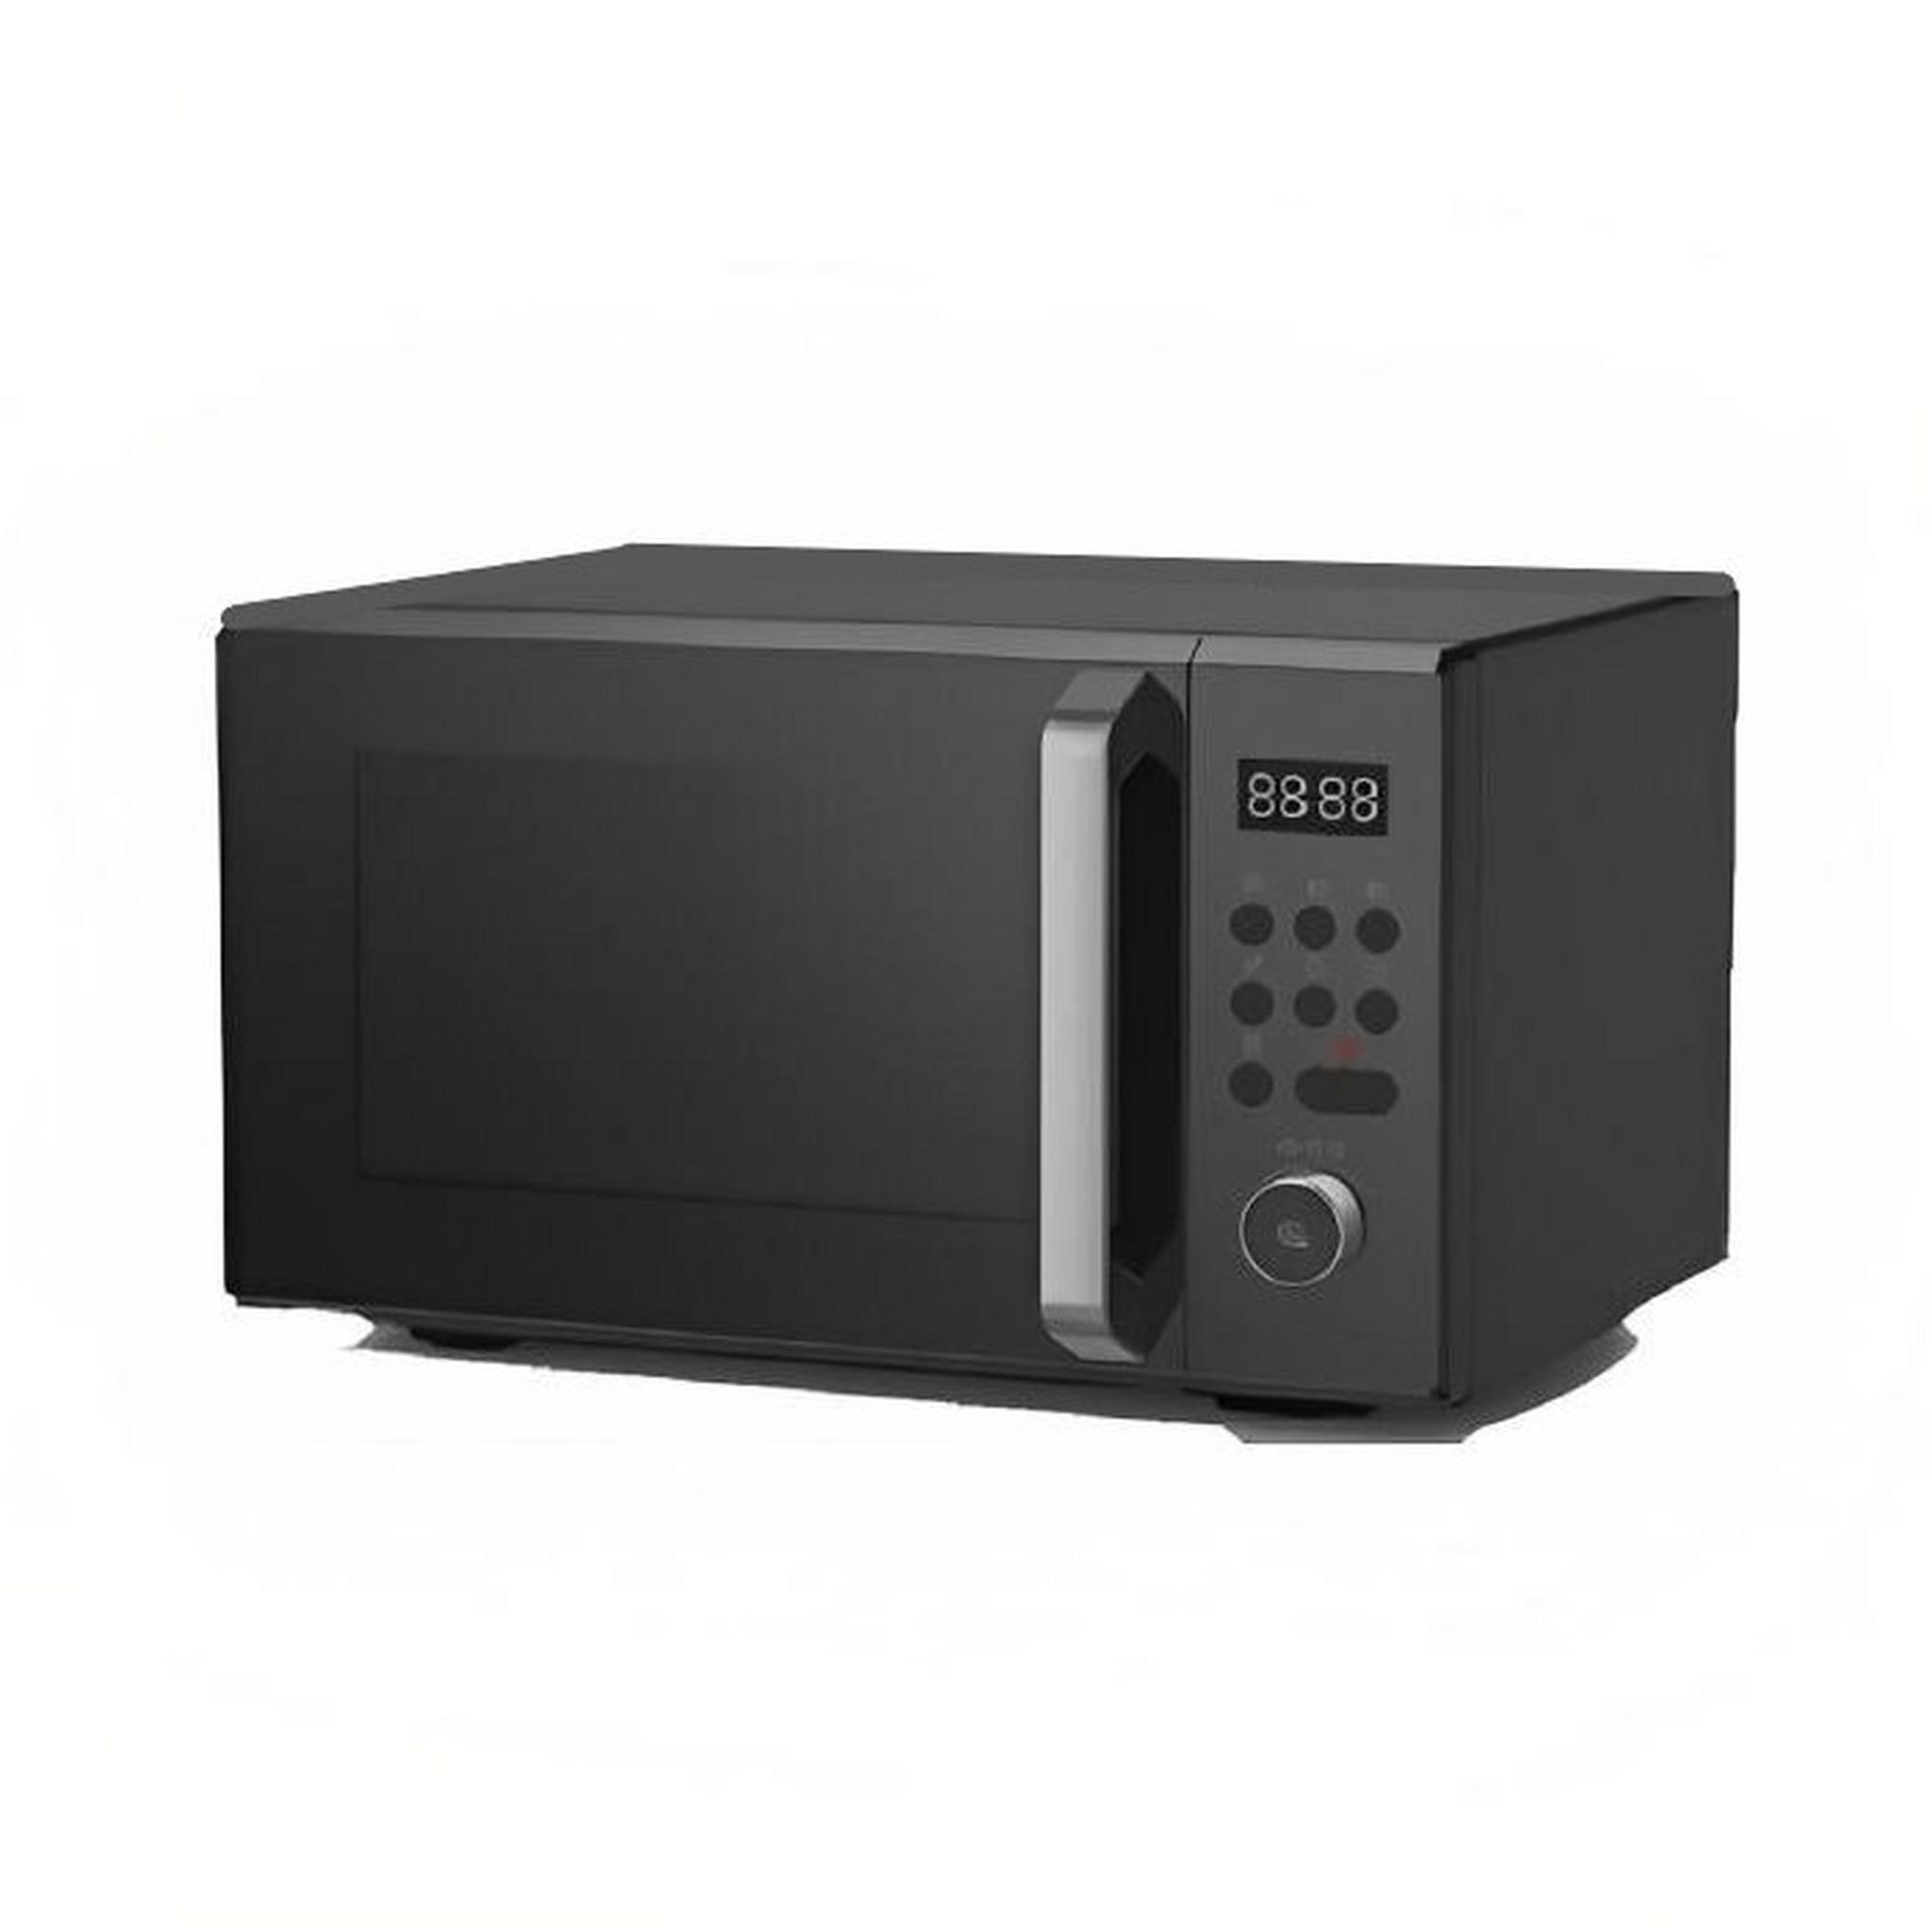 Wansa Microwave Oven, 31L Price in Kuwait | Xcite